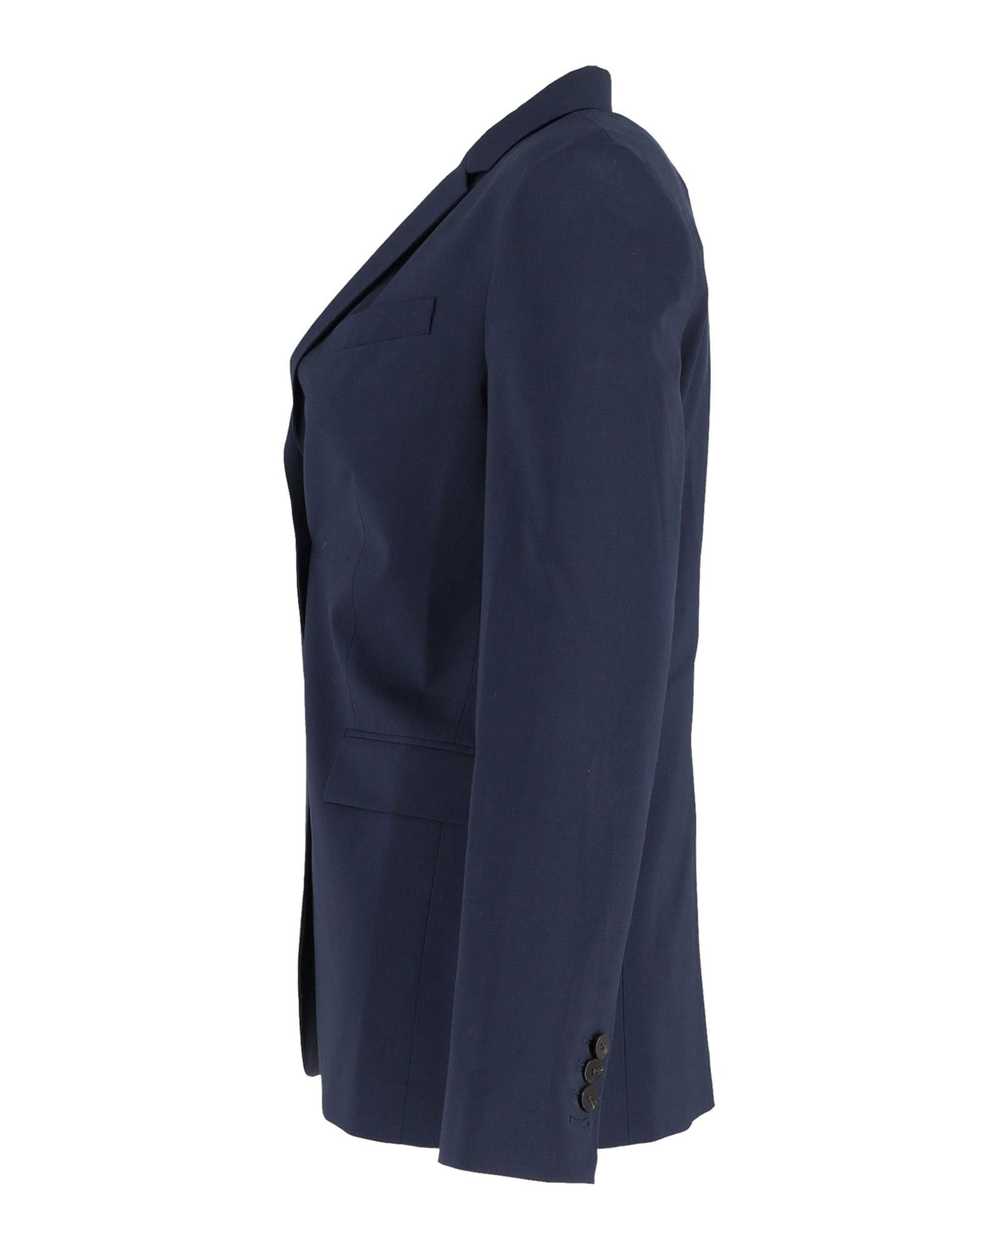 Theory Navy Blue Single-Breasted Blazer Jacket in… - image 2